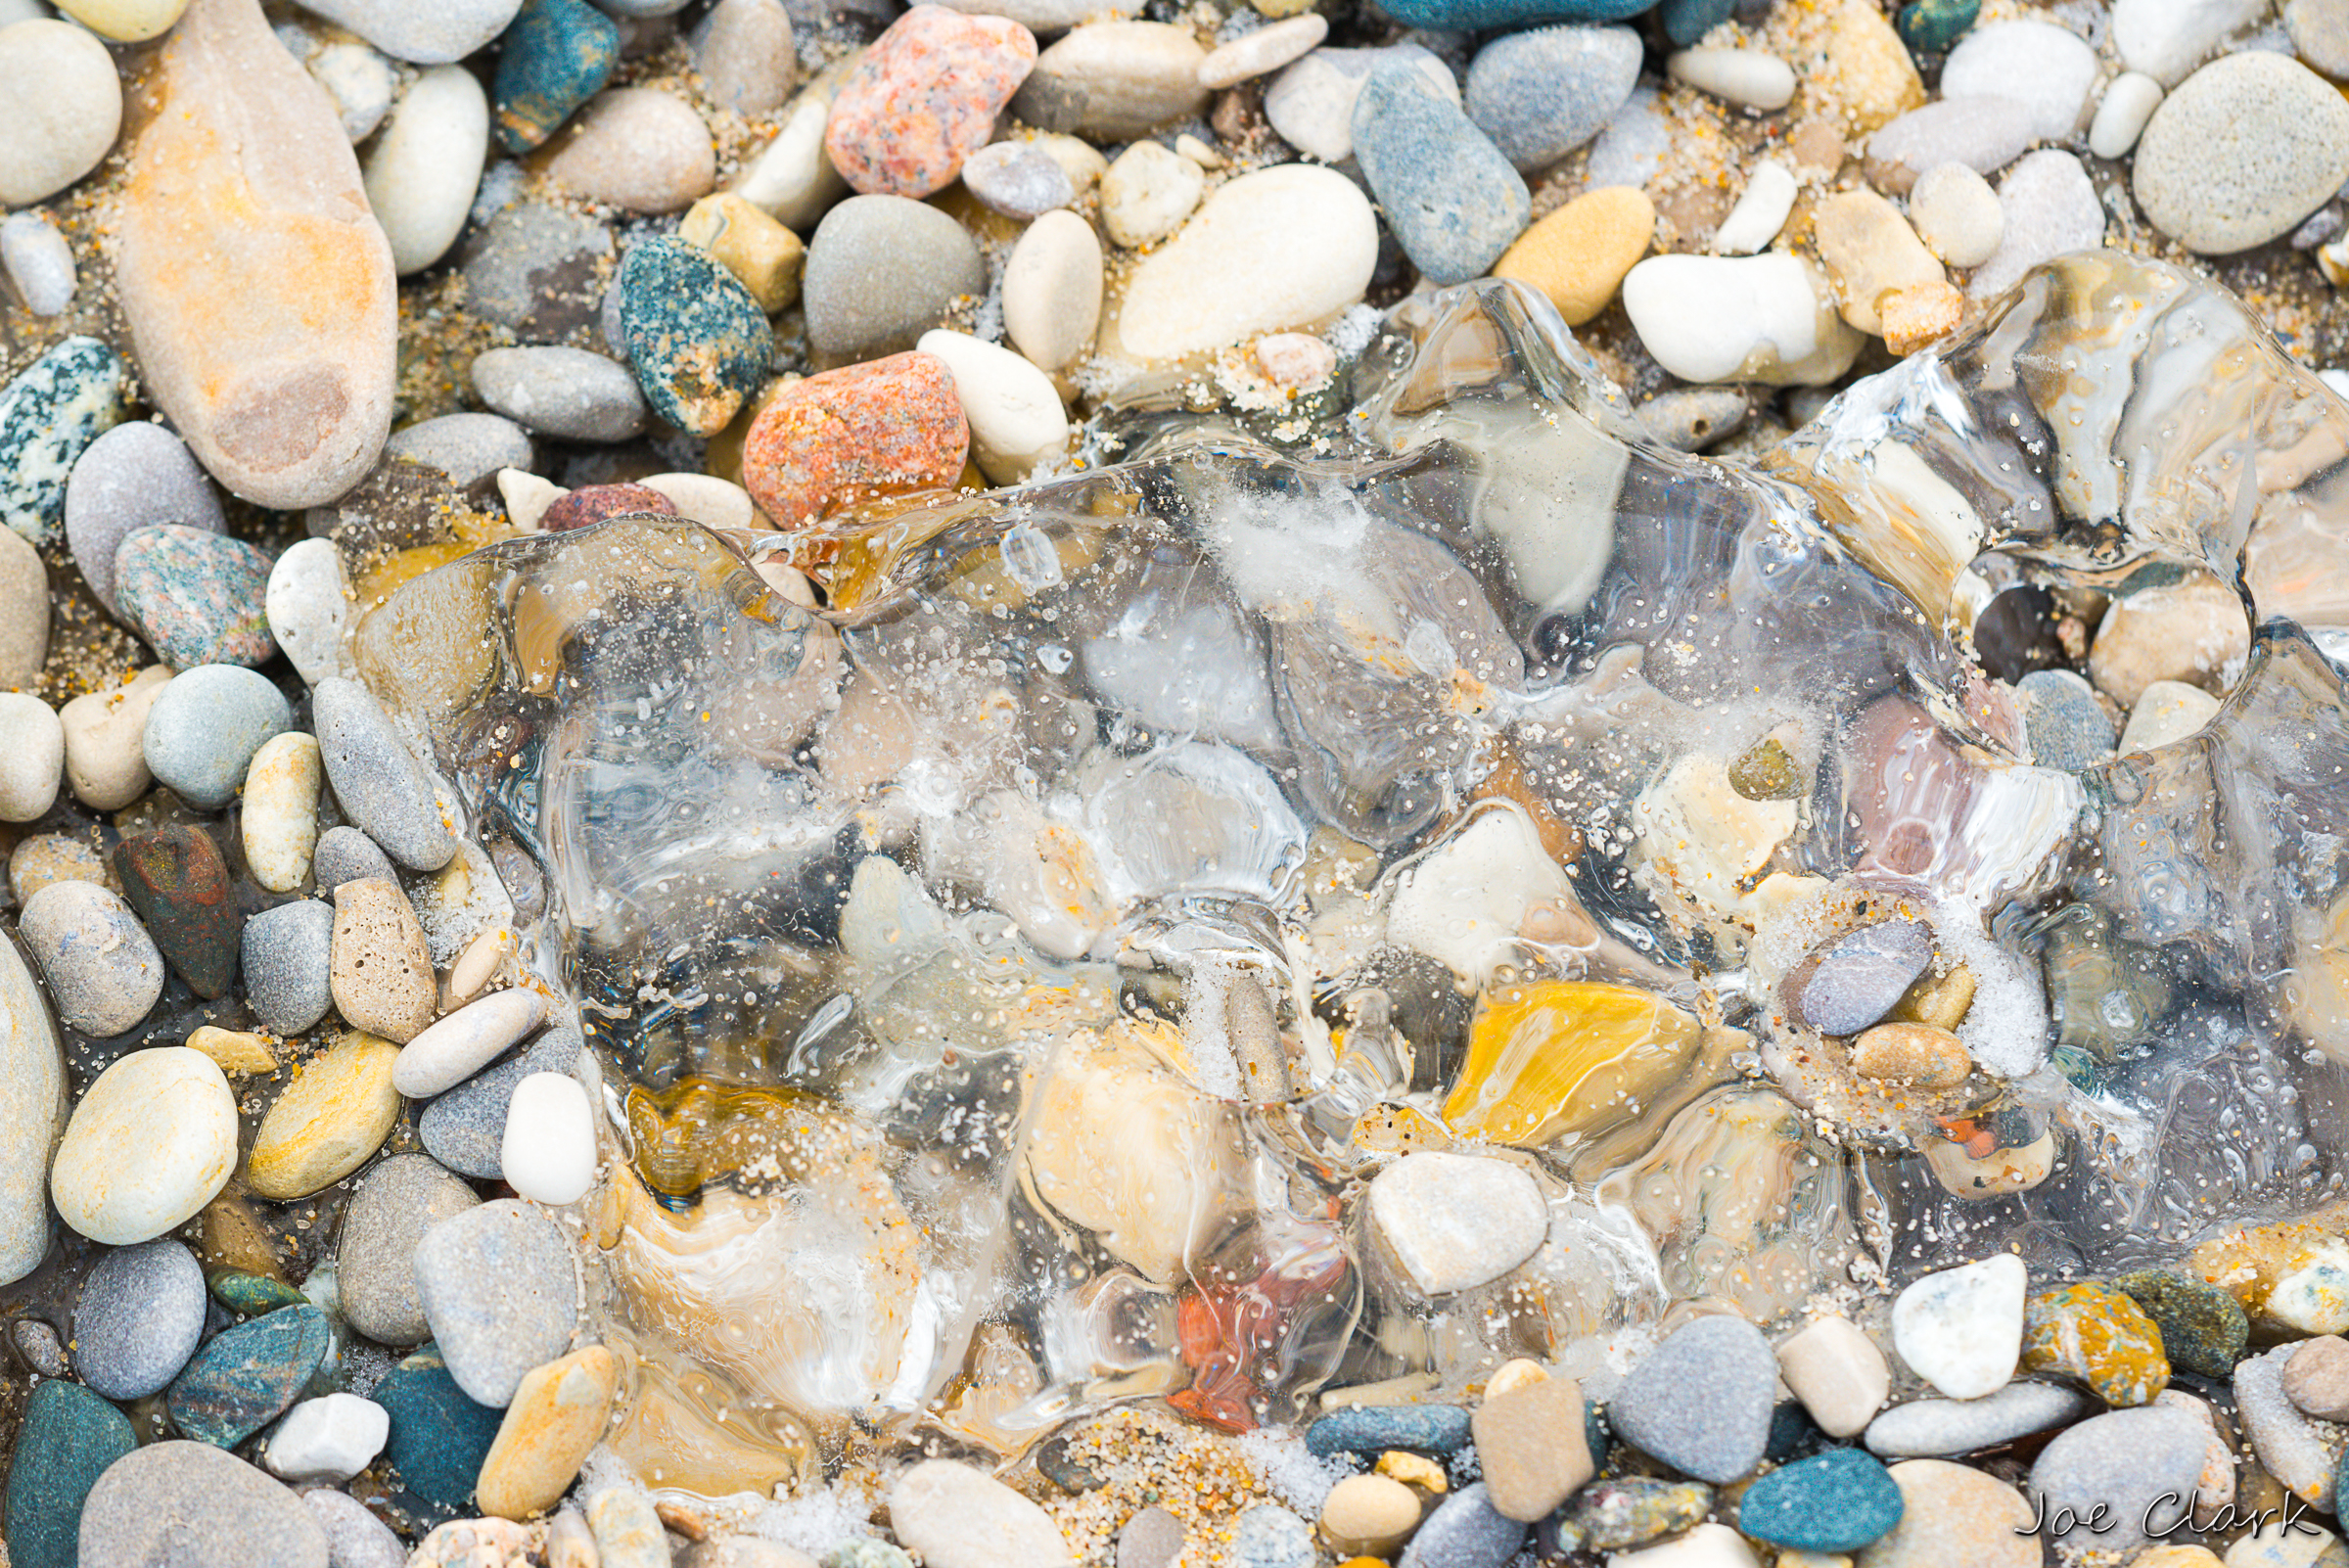 Ice and Pebbles 3 by Joe Clark American landscape Photographer